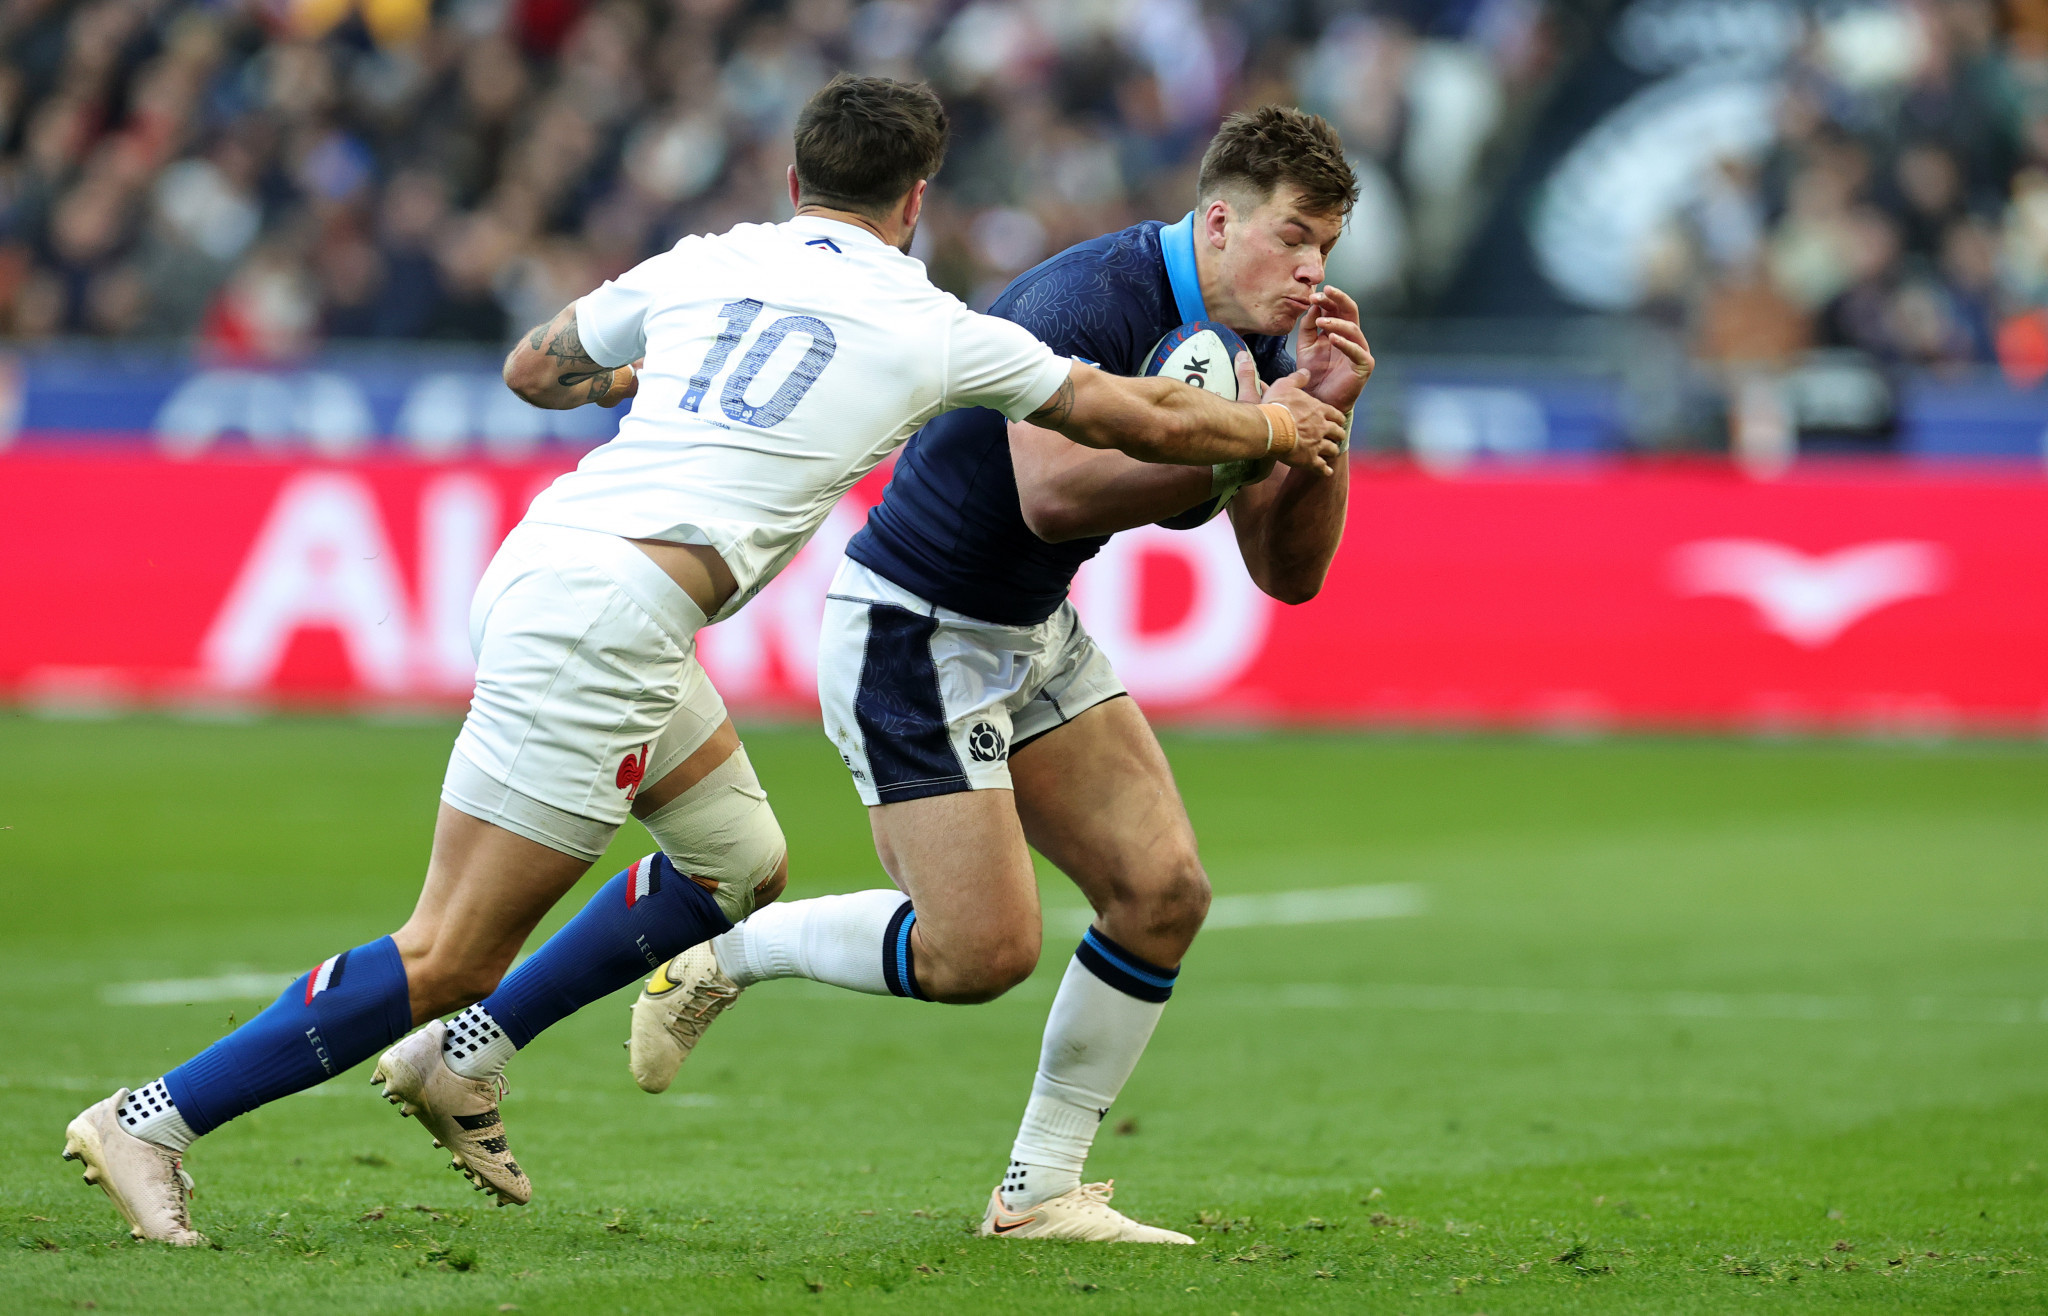 Rugby union has undergone many rule changes over the years - could switching to 14 players per side be another that would benefit the game? ©Getty Images